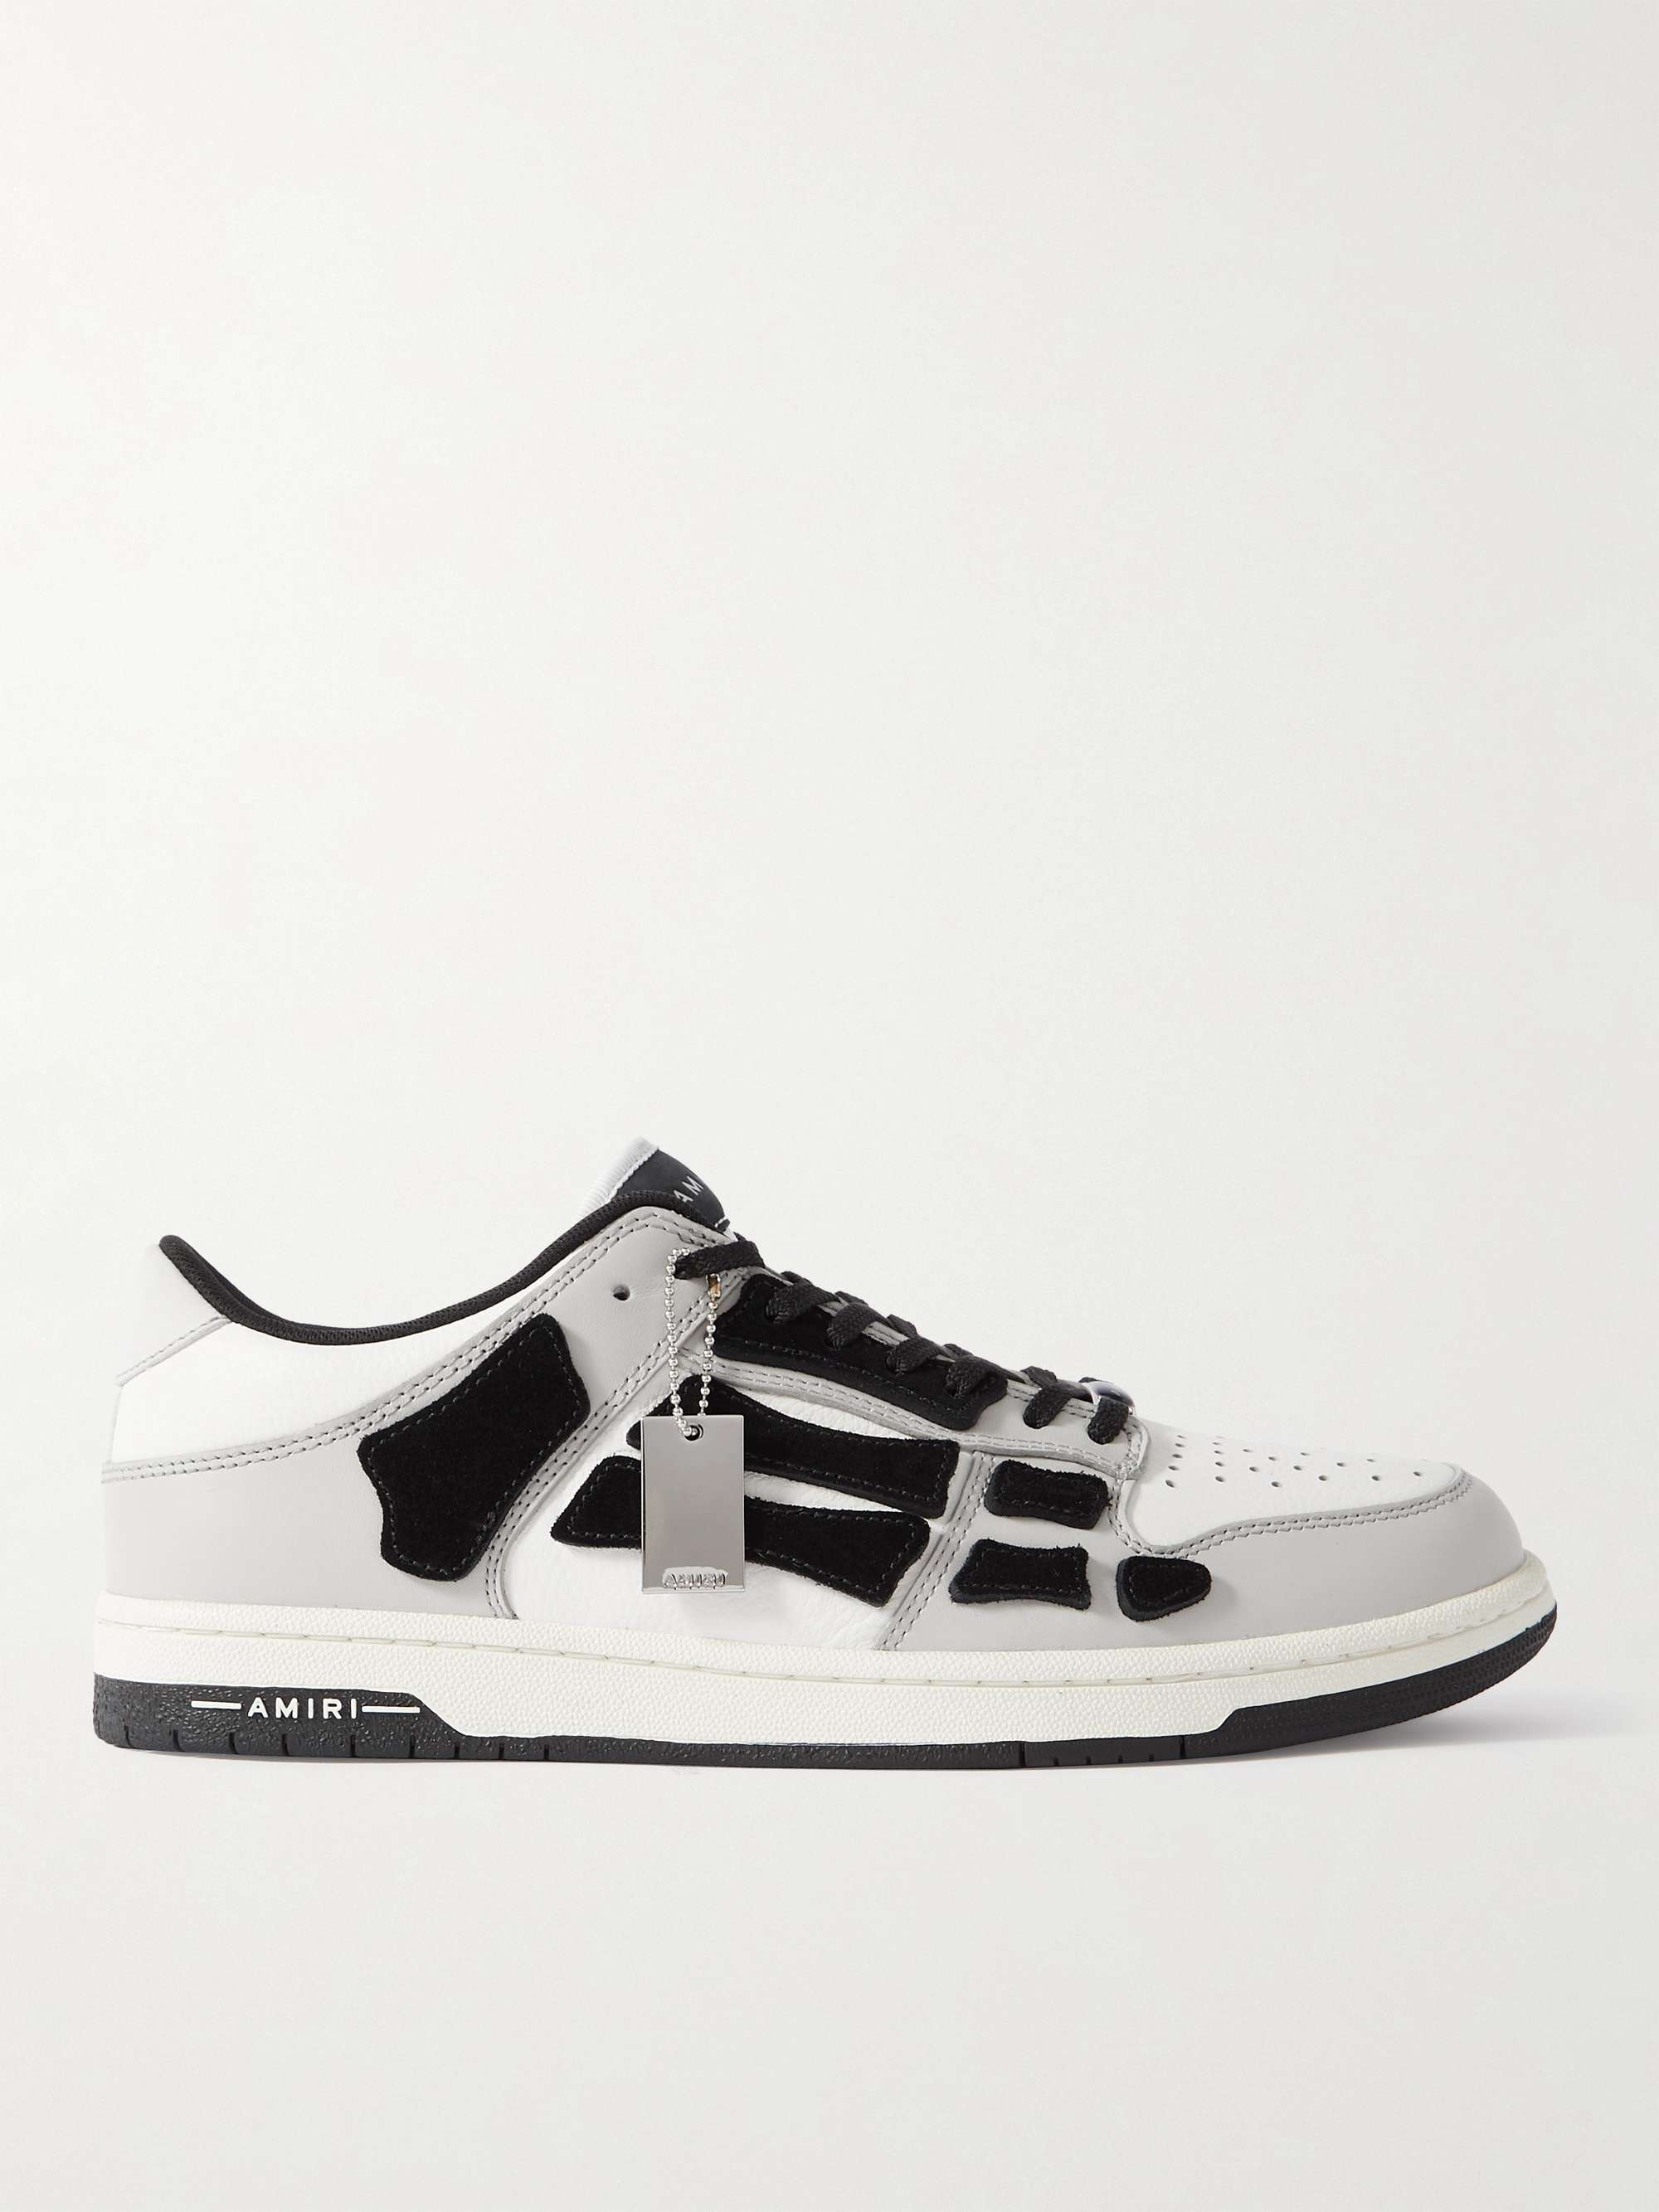 Gray Skel-Top Colour-Block Leather and Suede Sneakers | AMIRI | MR PORTER